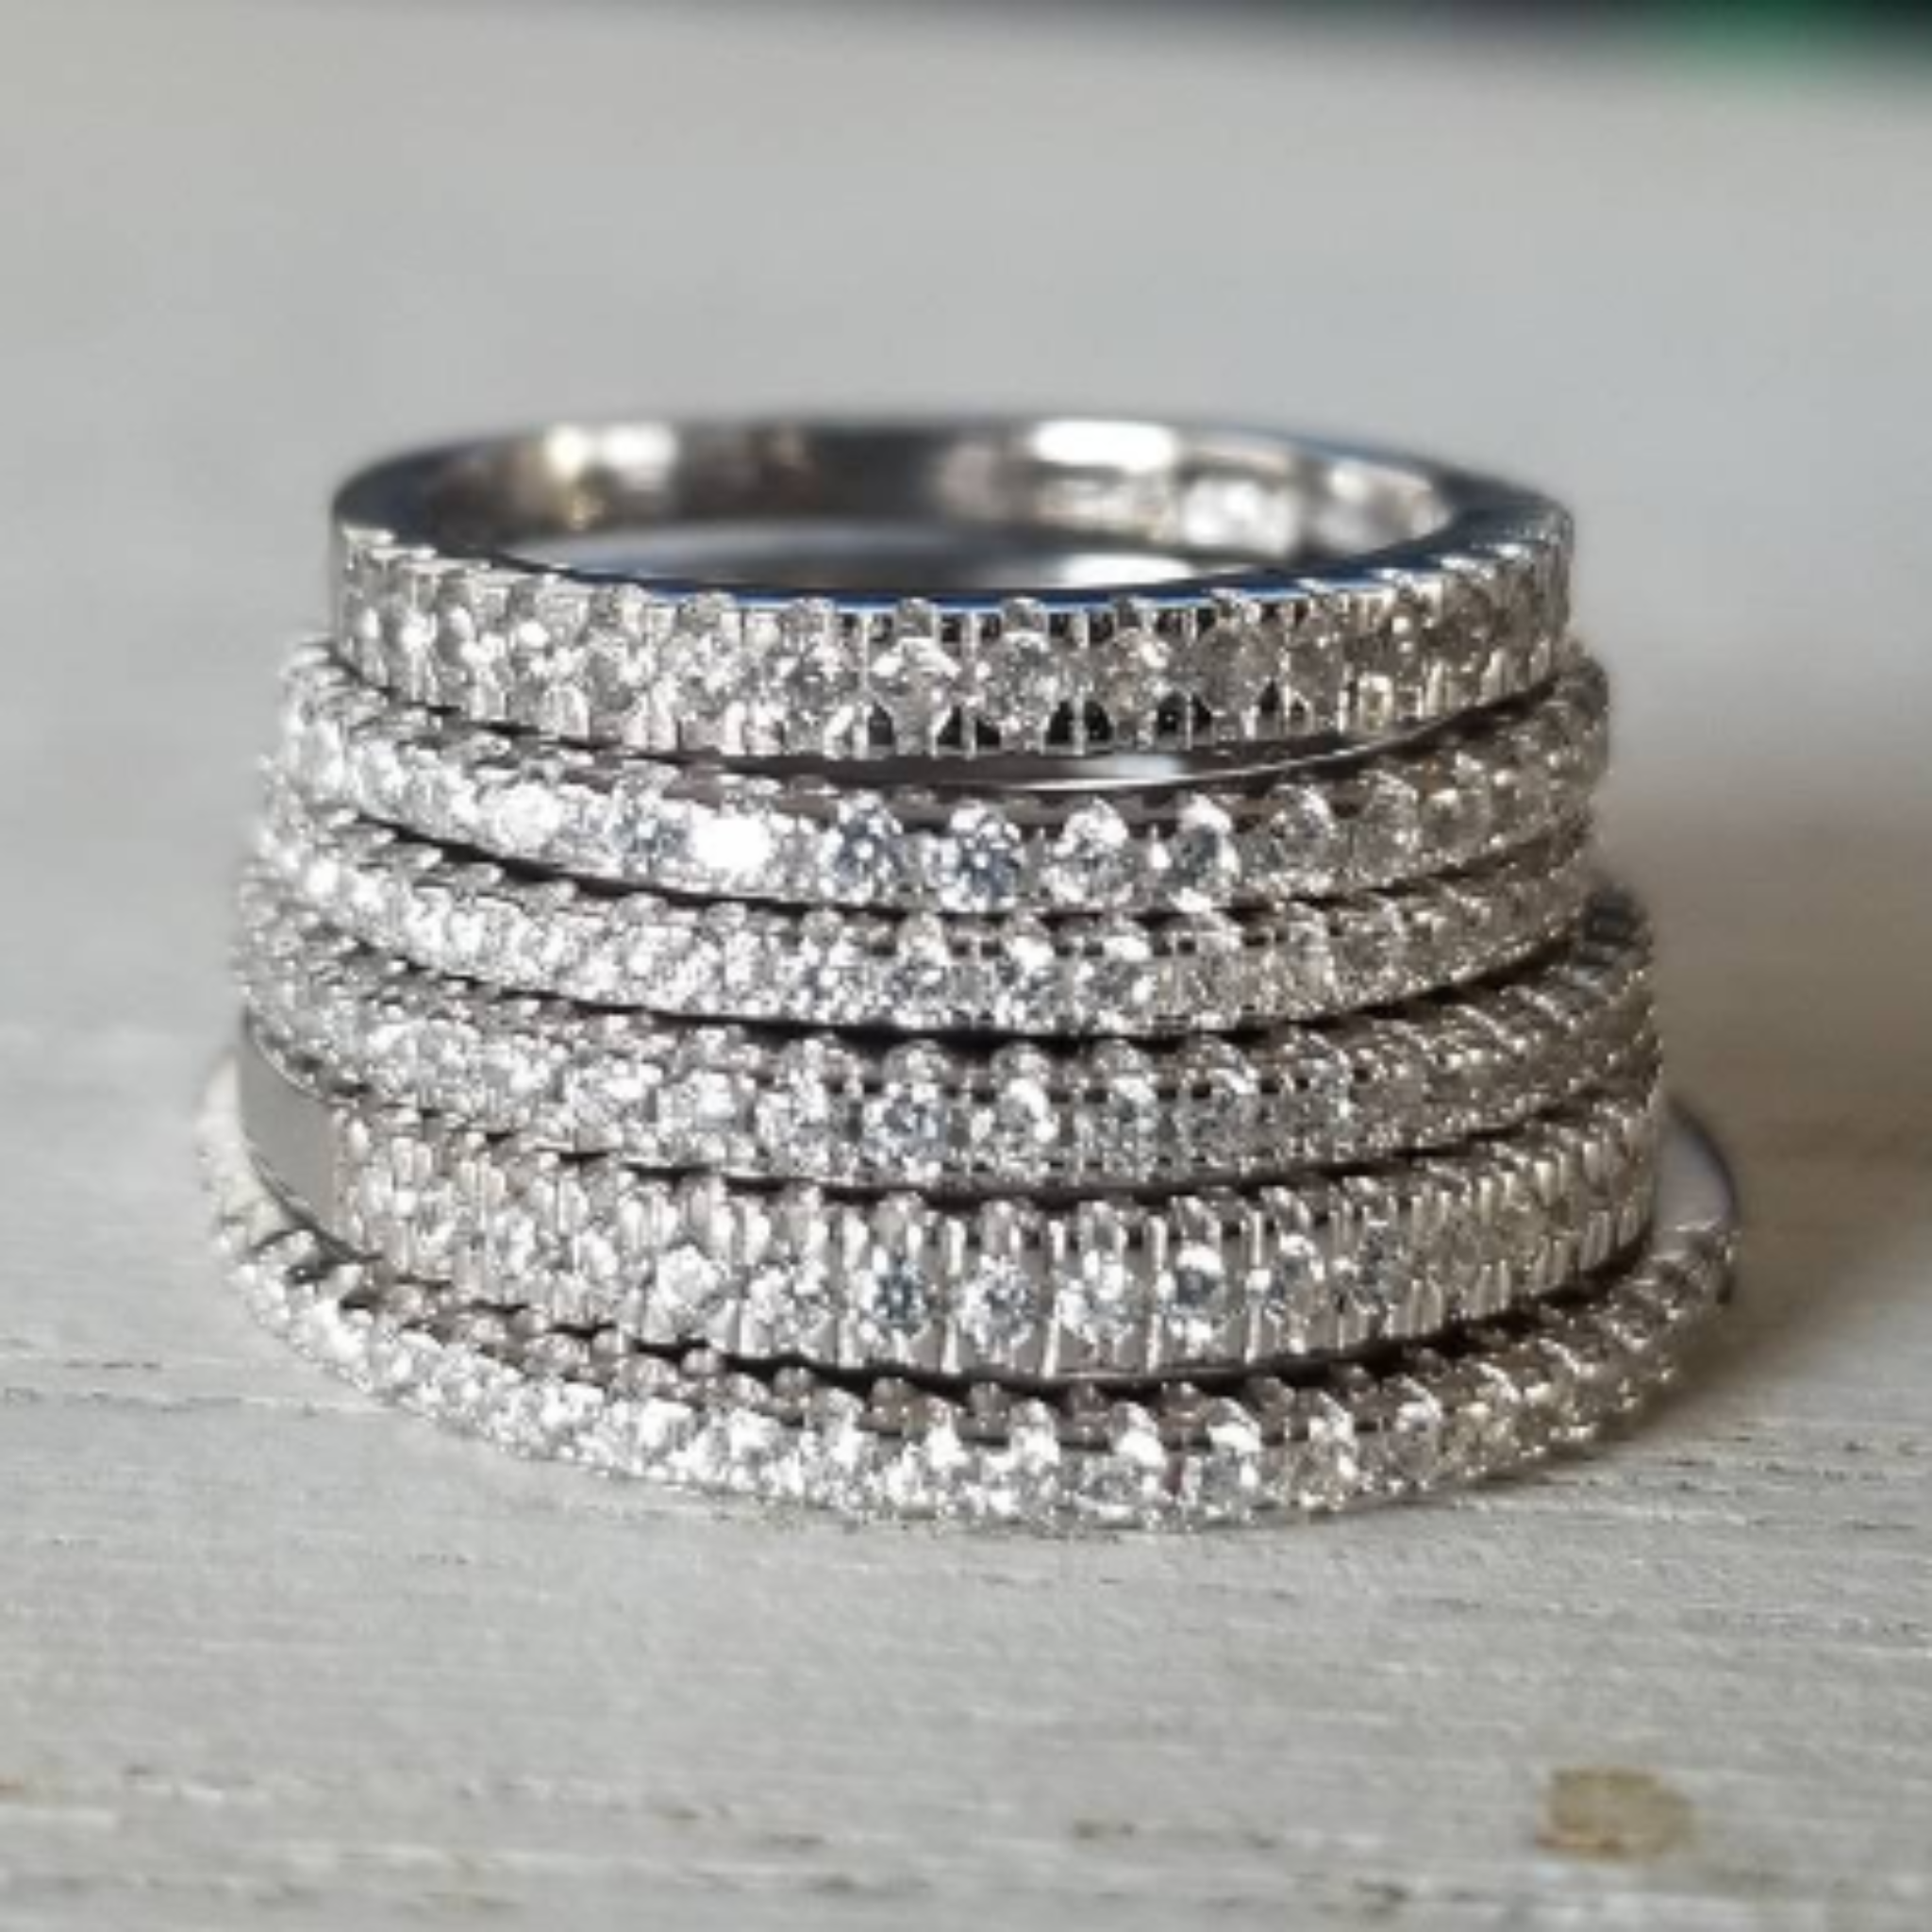 Sterling Silver CZ Eternity or Pave Band